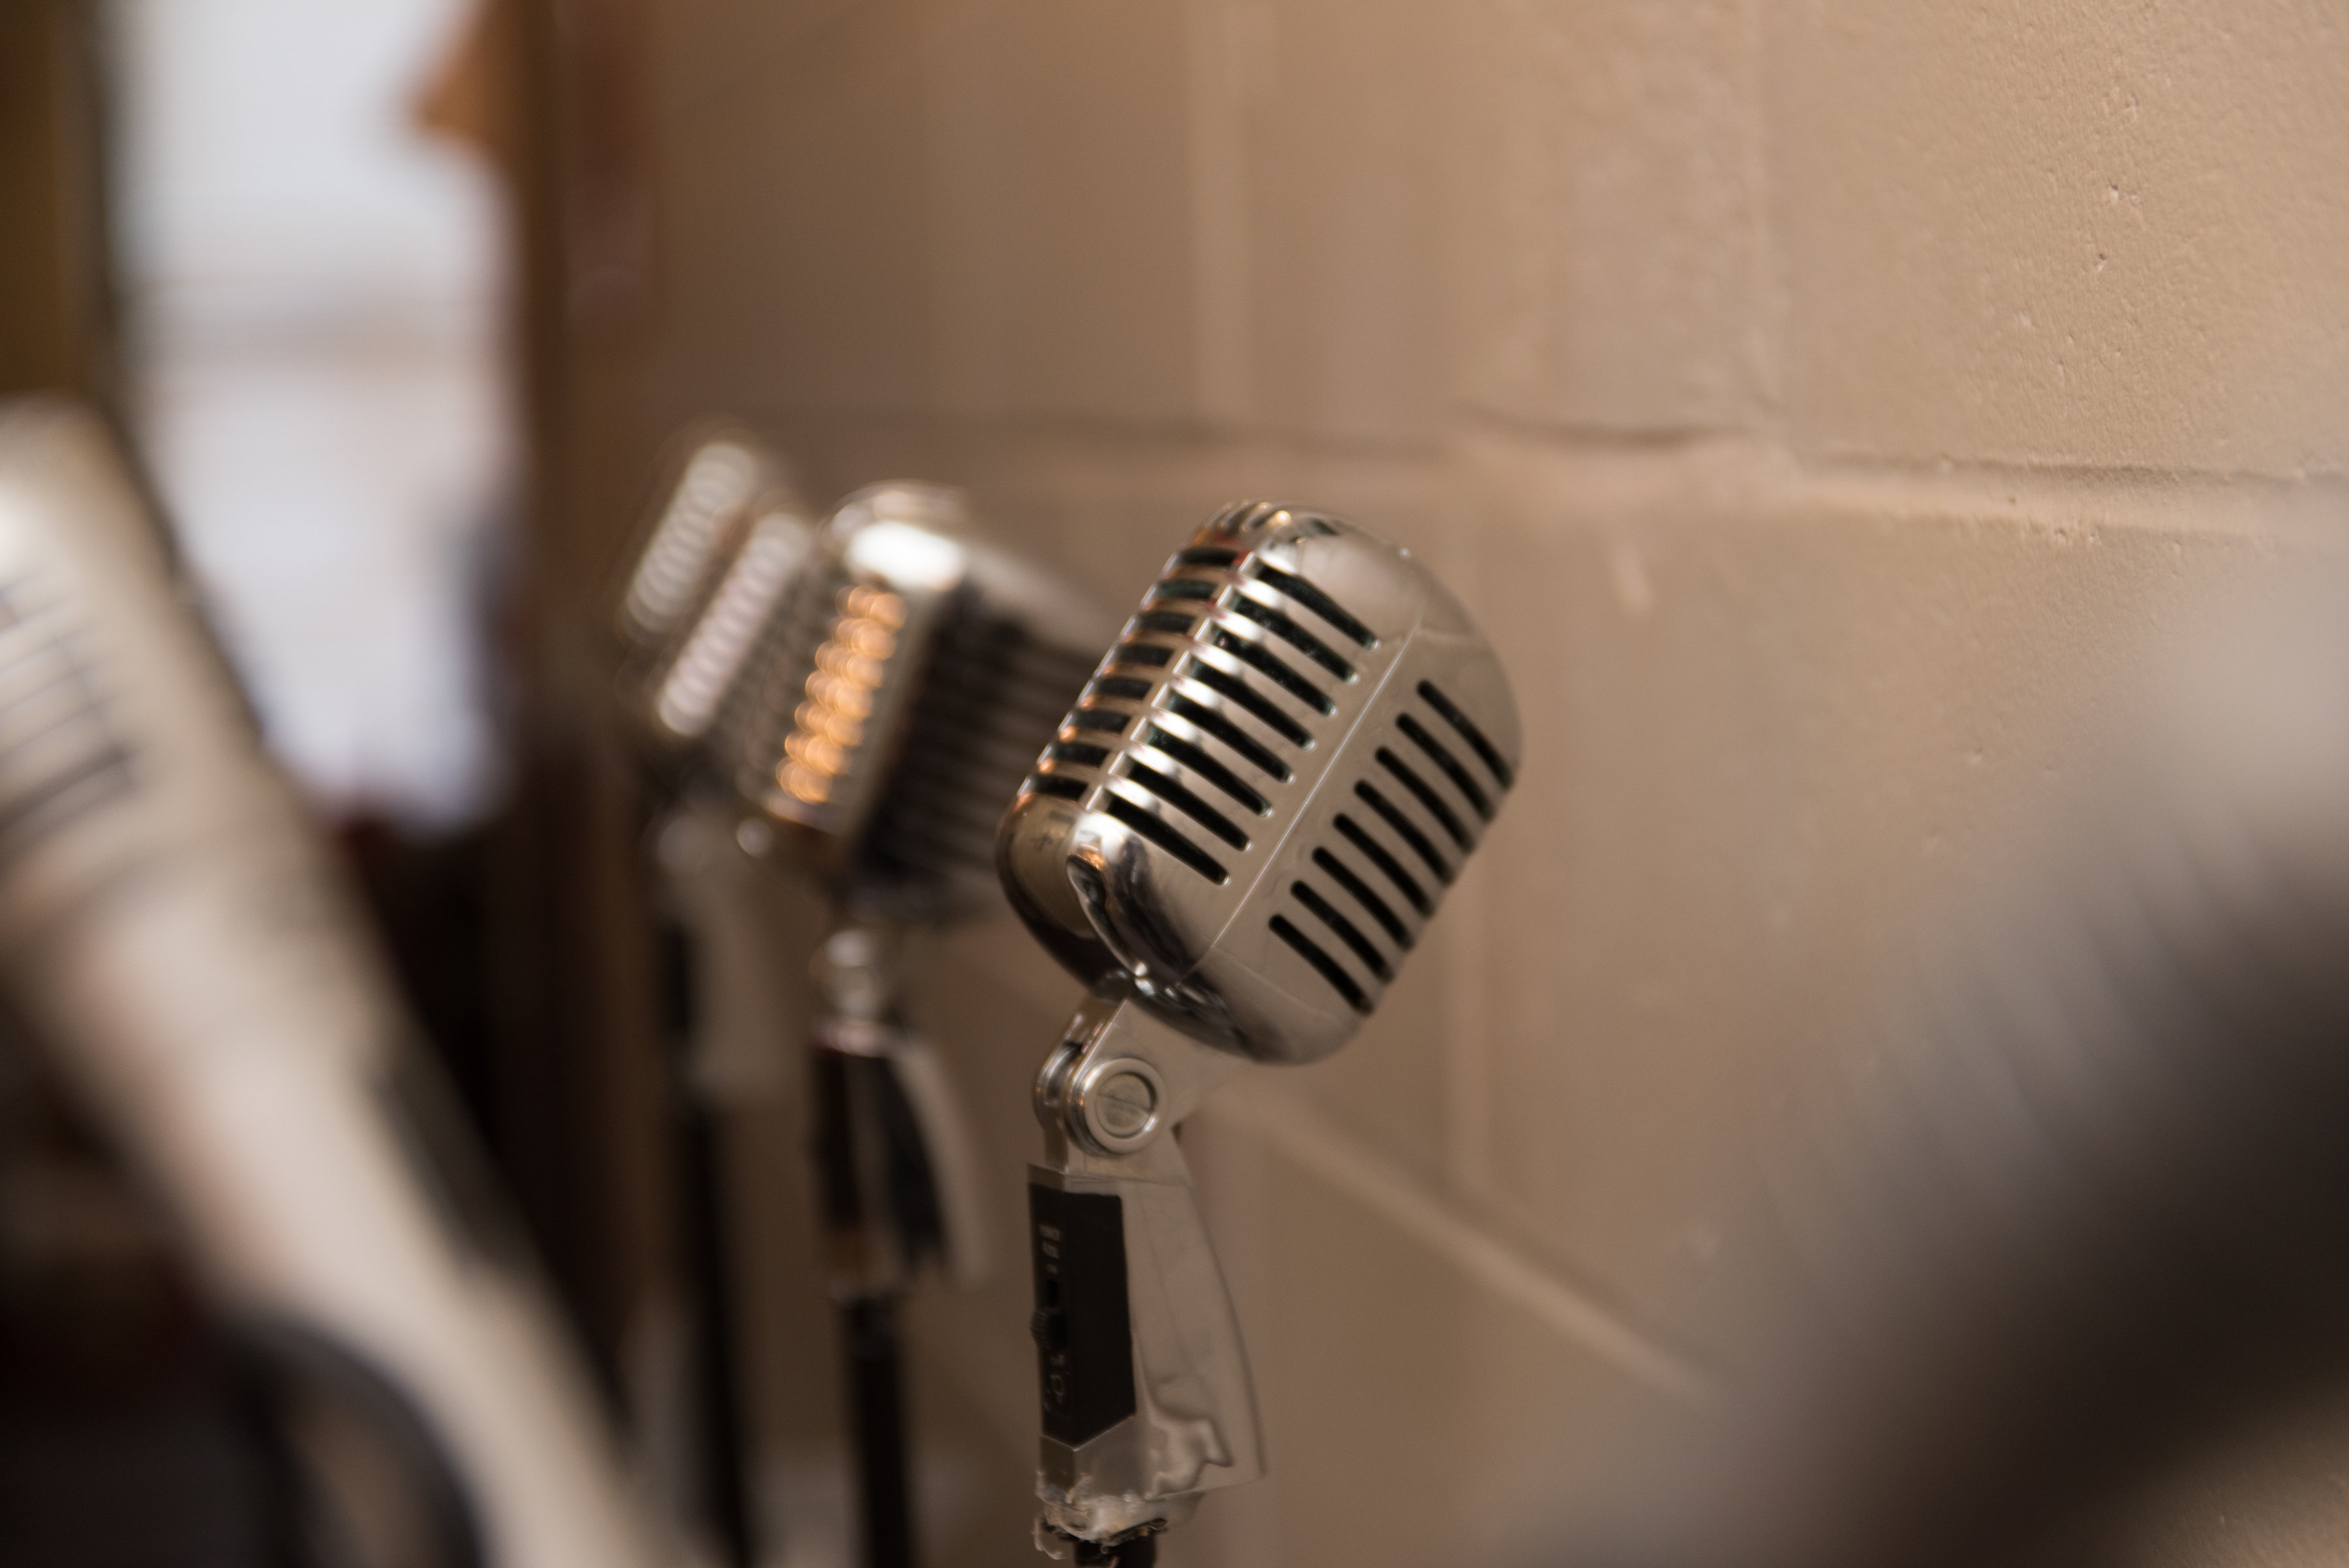 Artistic close up photograph of vintage microphone